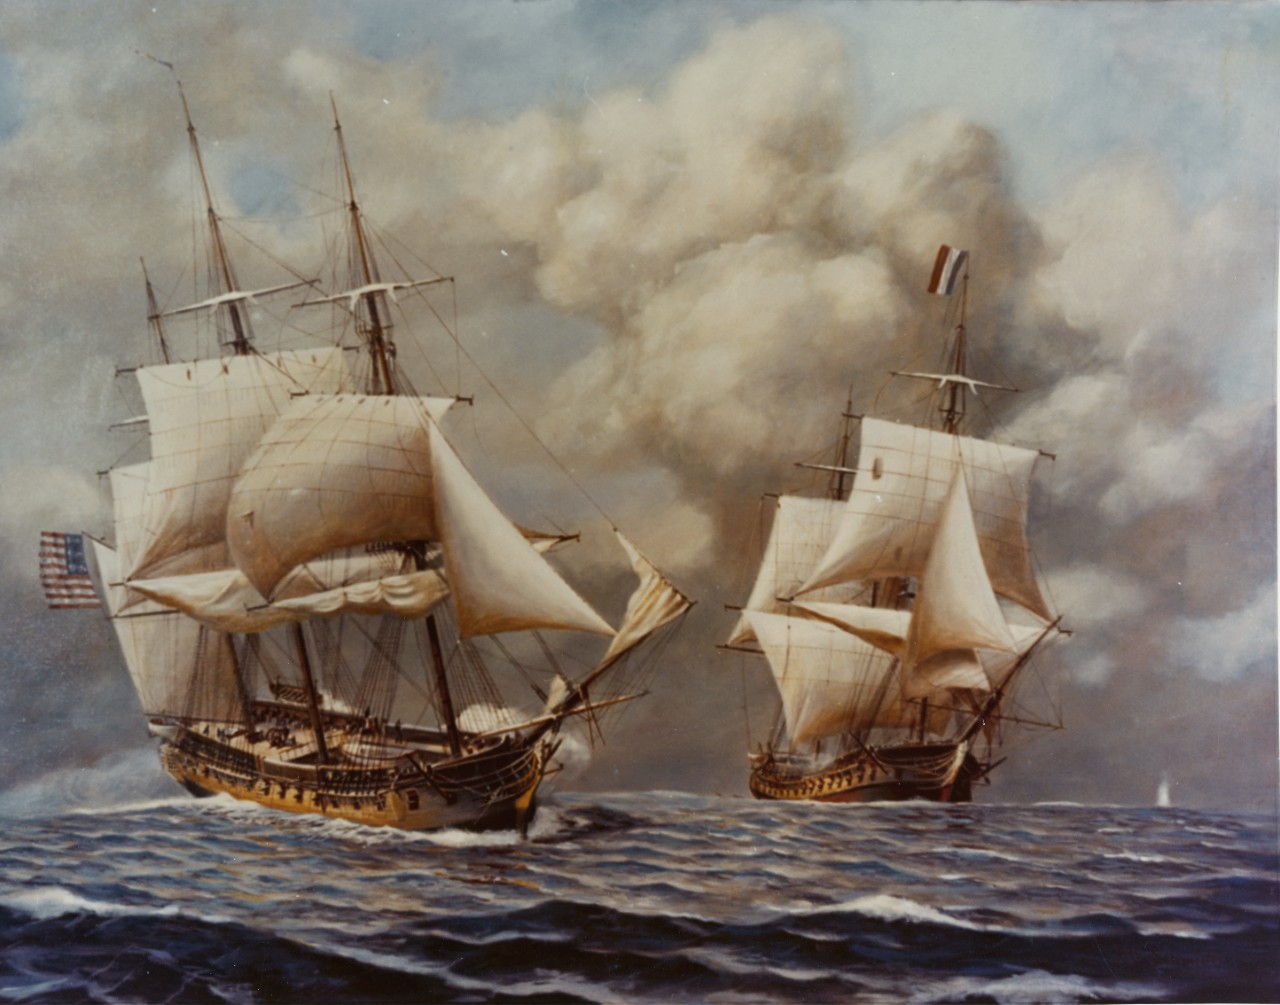 Photo #: KN-2882 Action between U.S. Frigate Constellation and French Frigate Insurgente, 9 February 1799